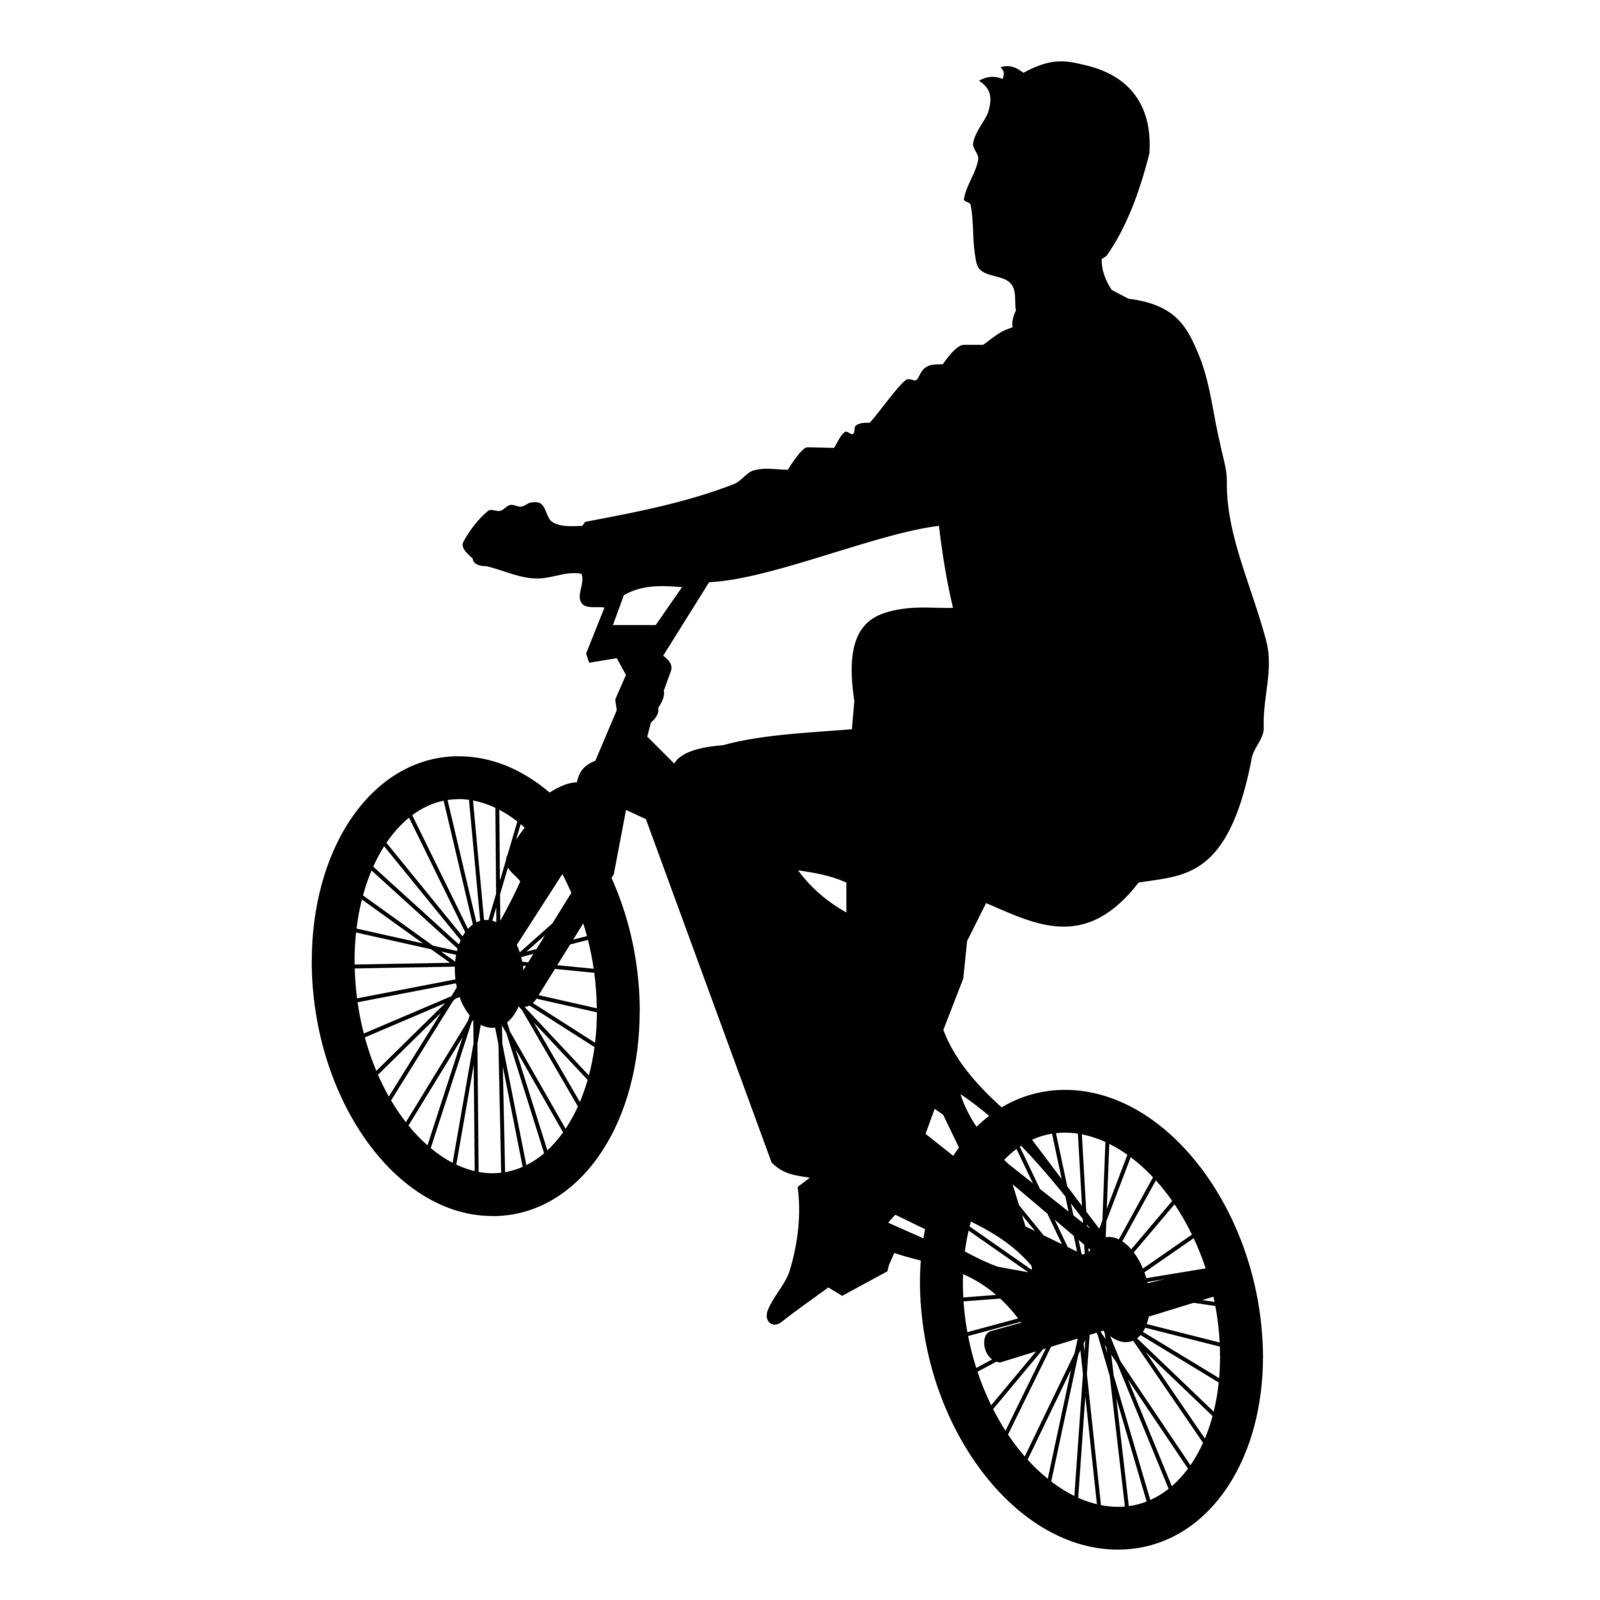 Bicycle rider silhouette isolated on white 